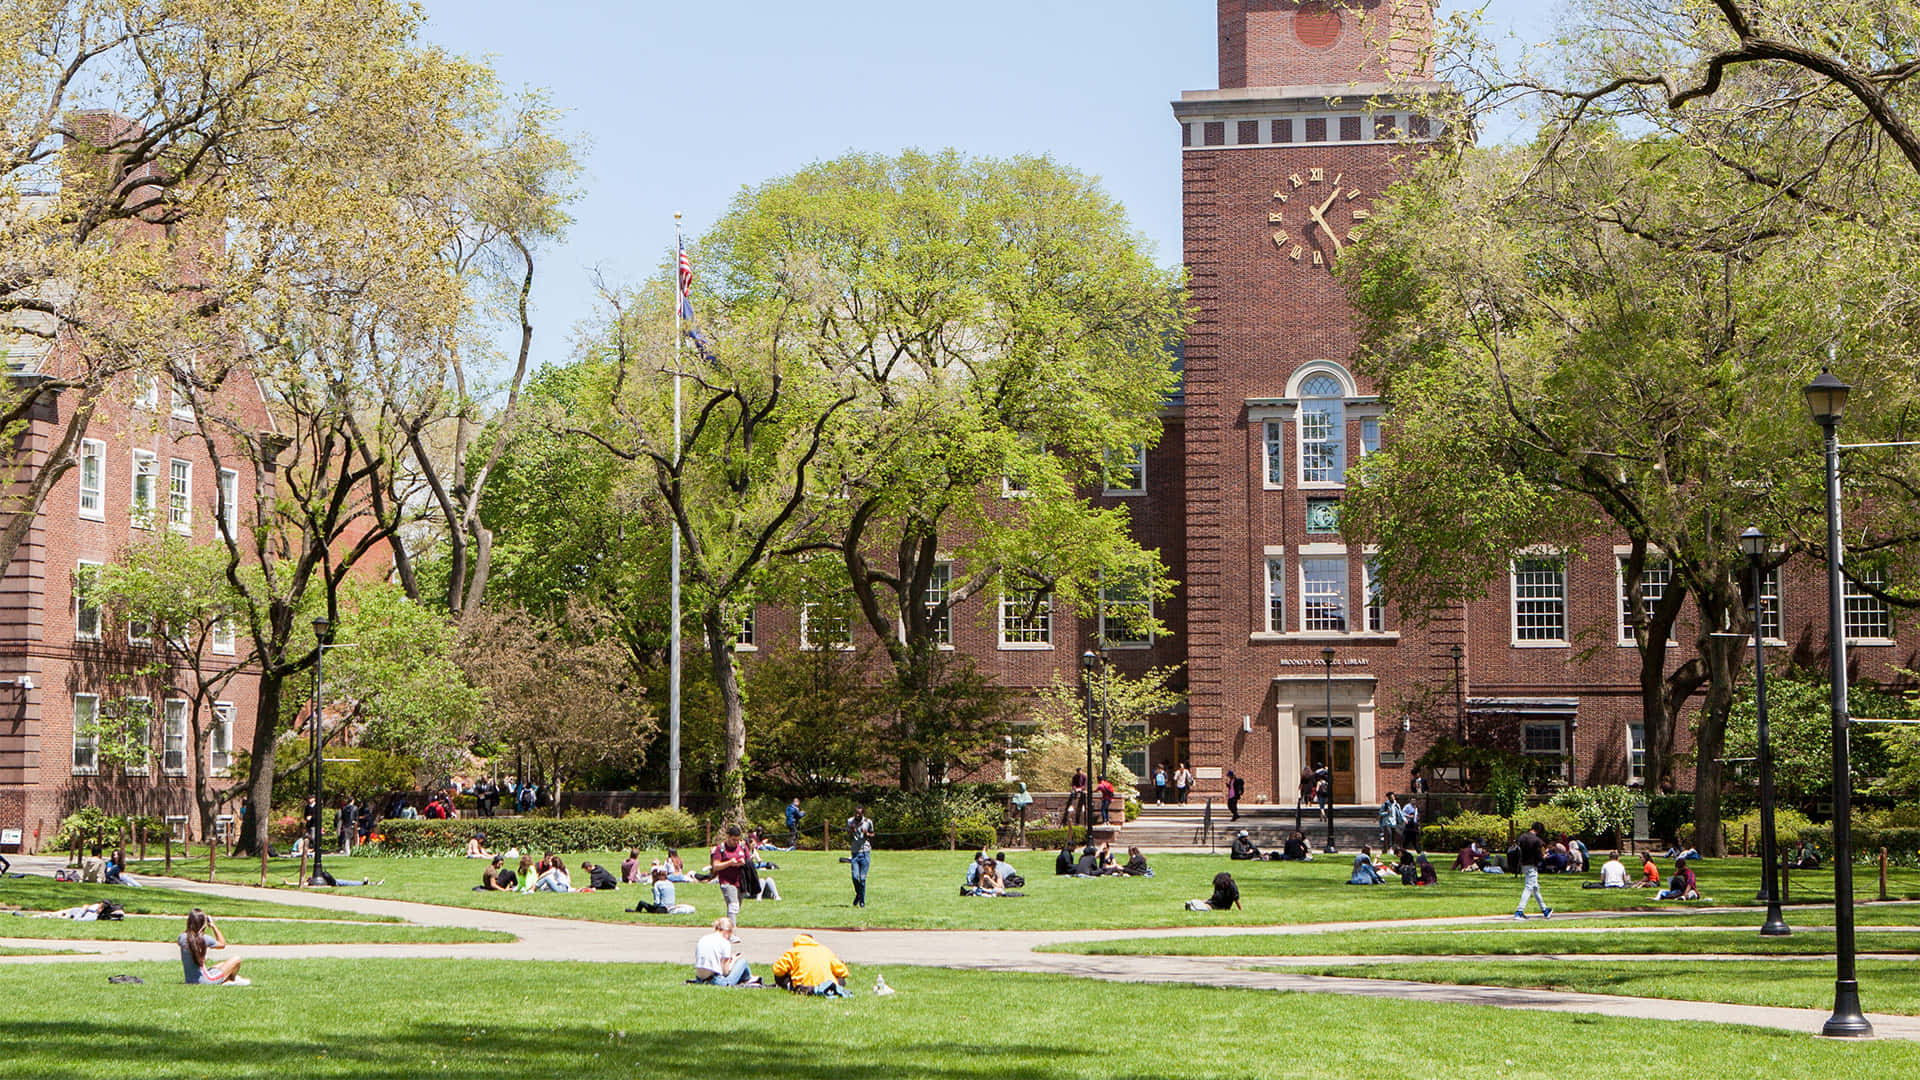 A Large Campus With Many People Sitting On The Grass